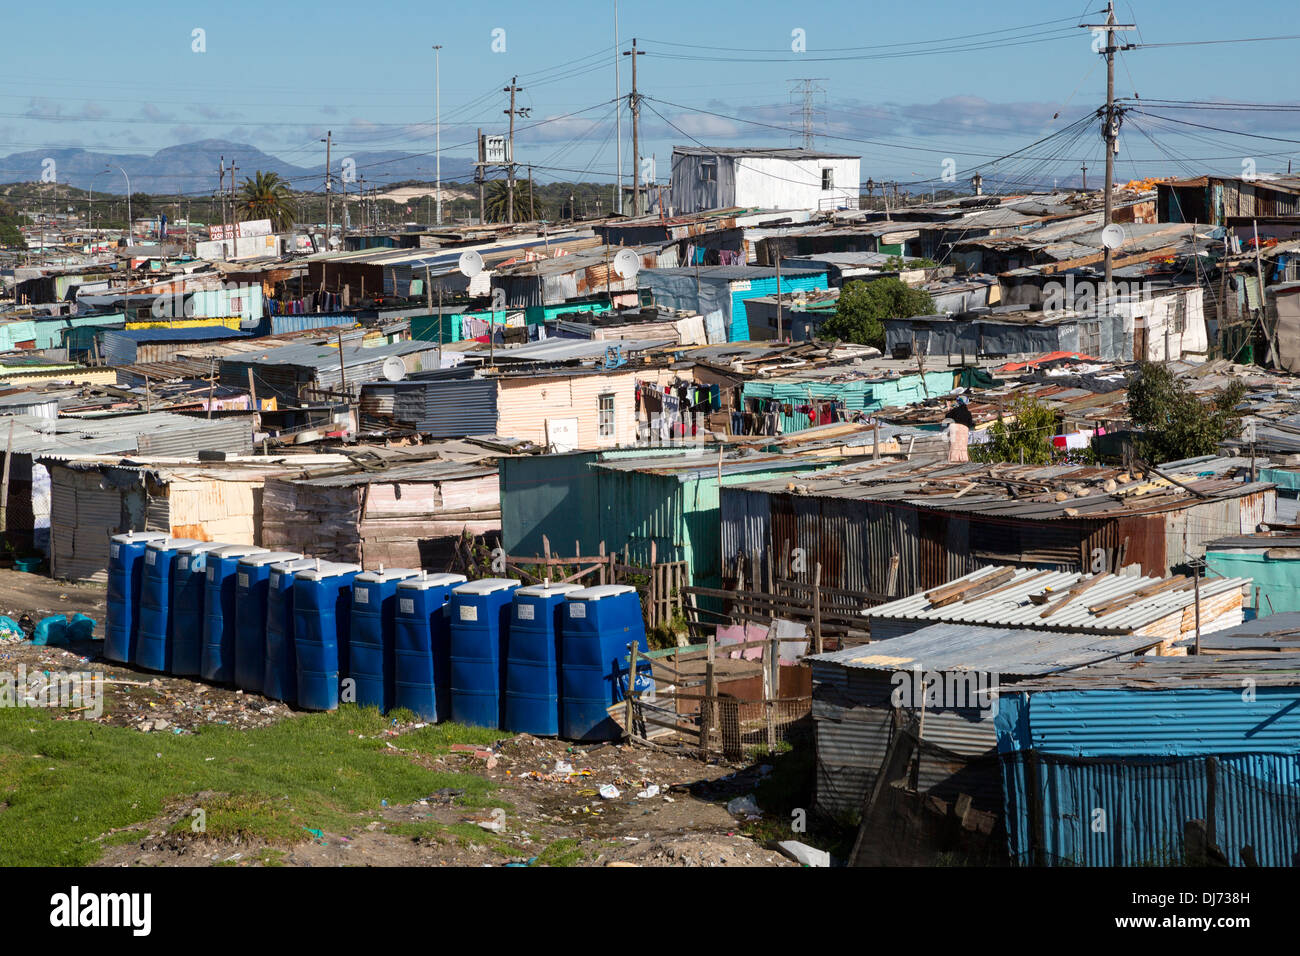 South Africa, Cape Town, Khayelitsha Township. Blue Portable Toilets in Foreground. Stock Photo